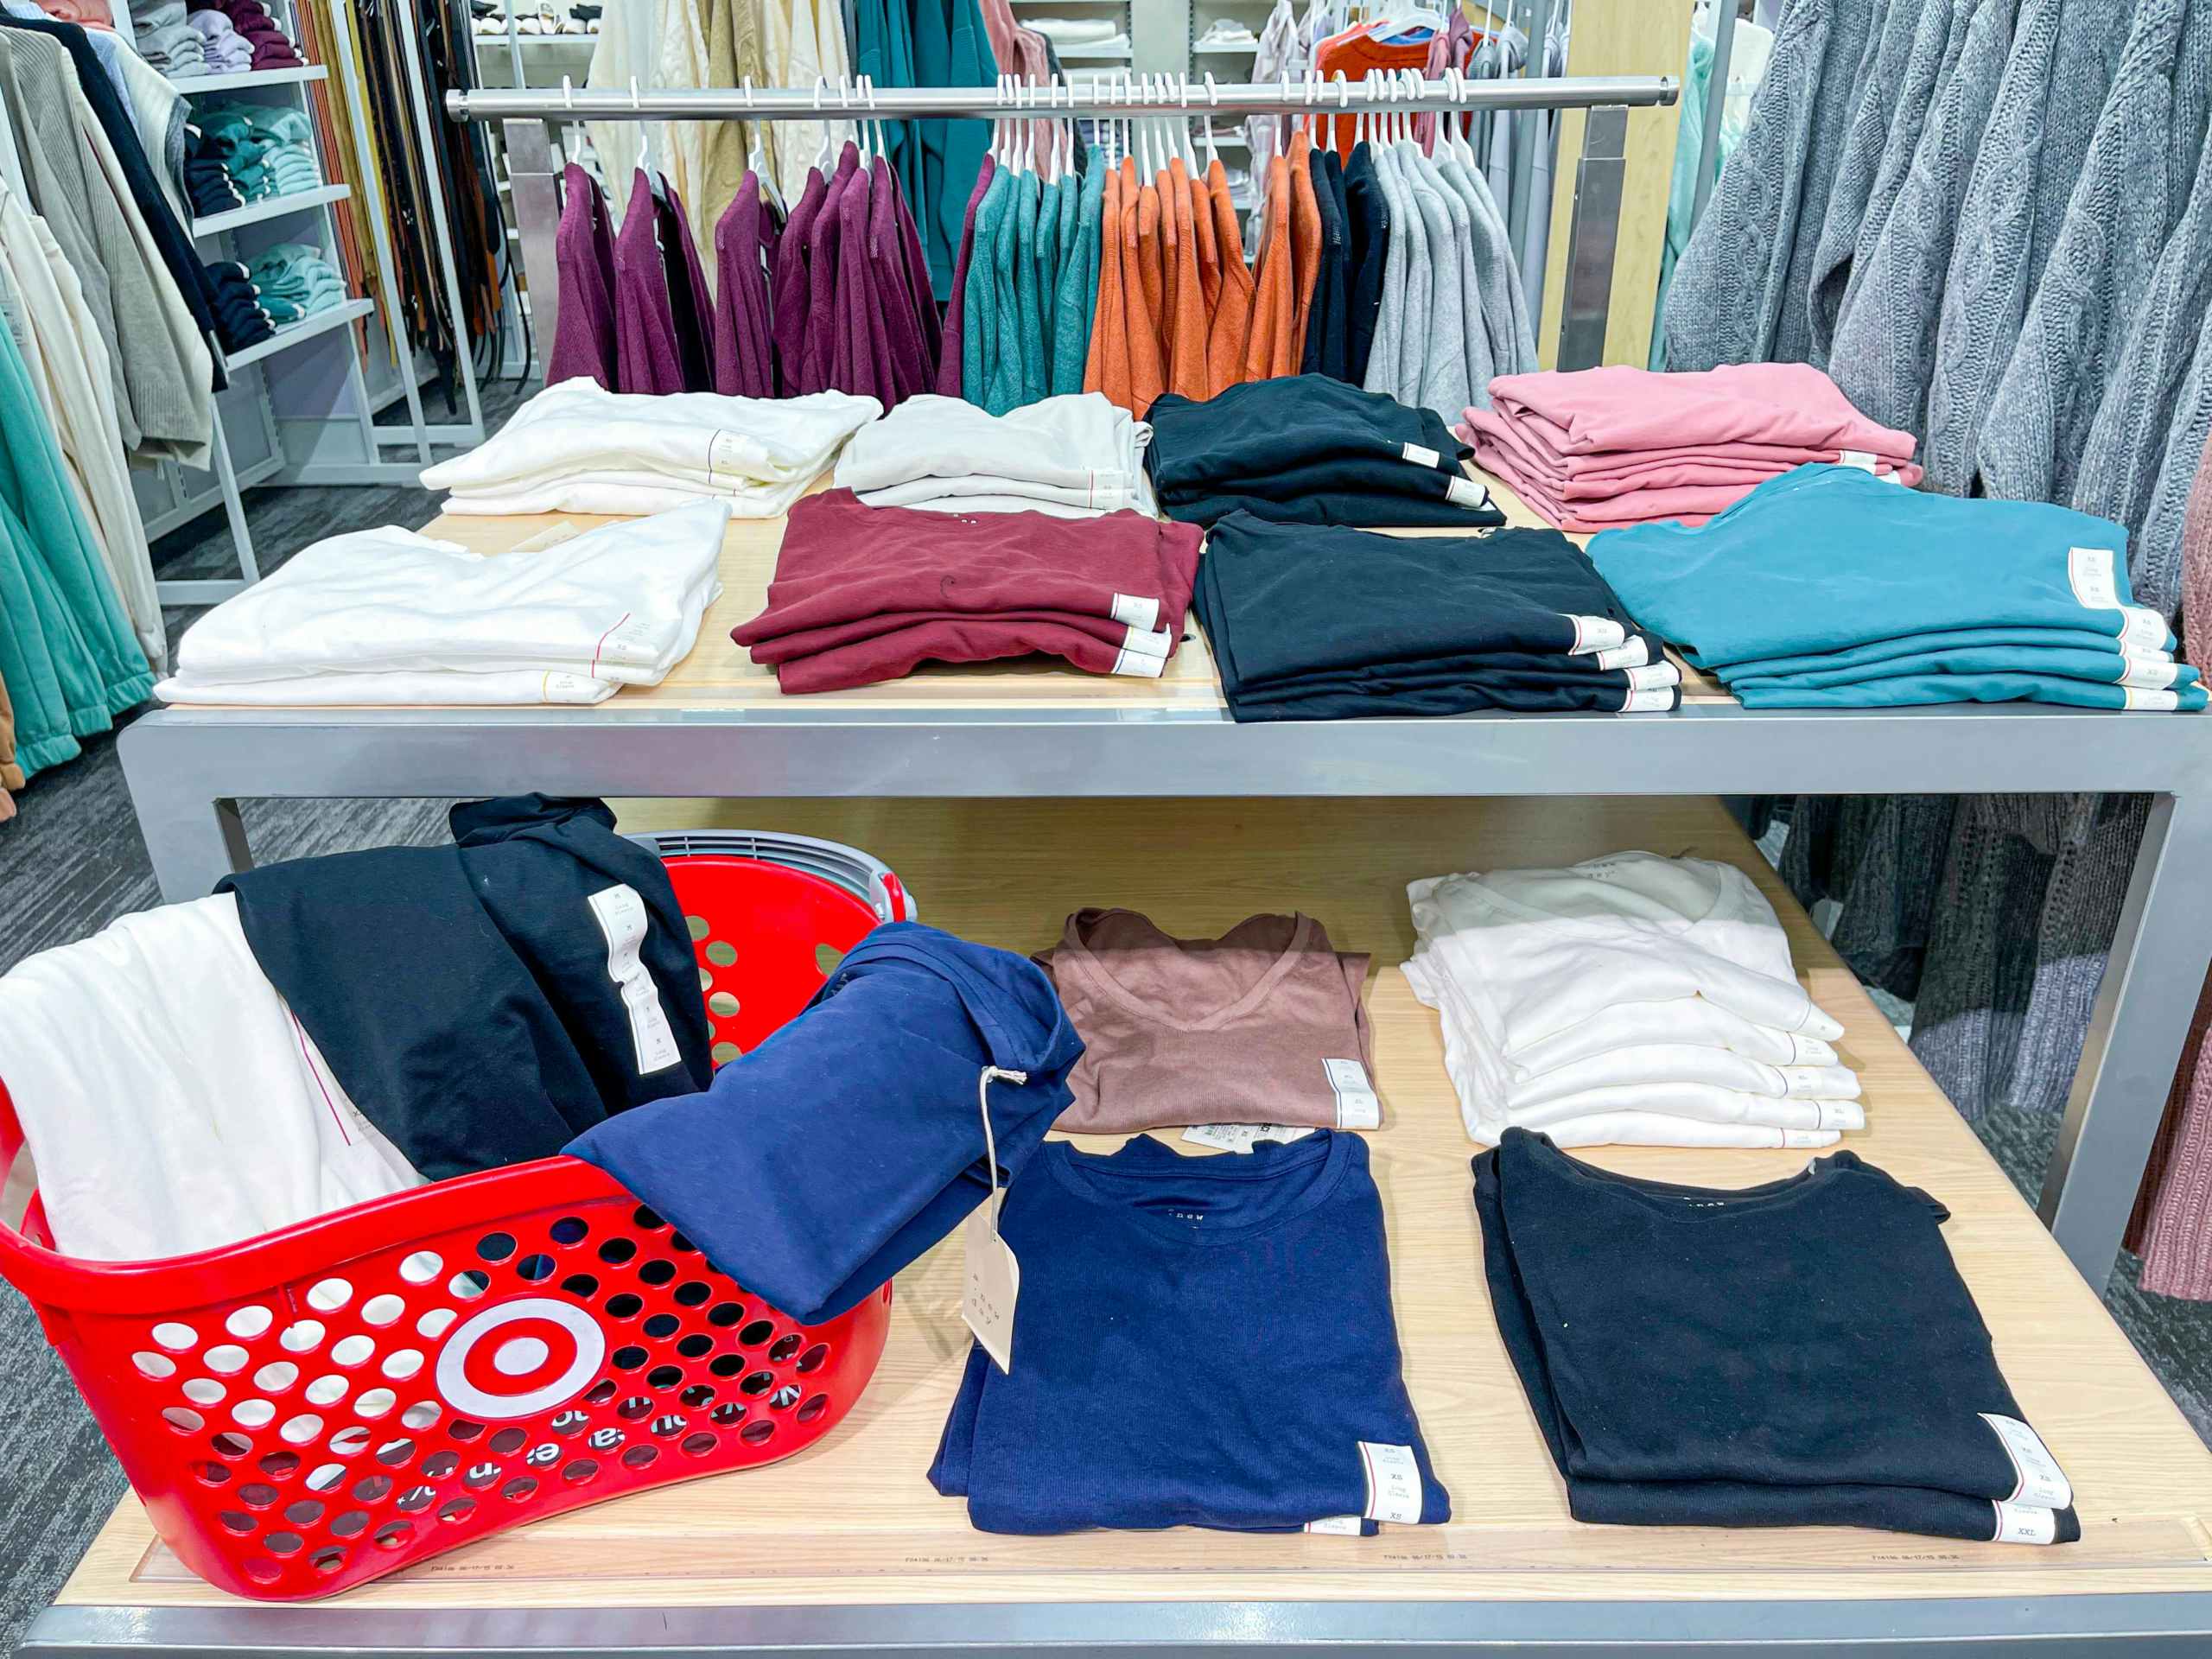 tee shirts on display shelves and in target basket